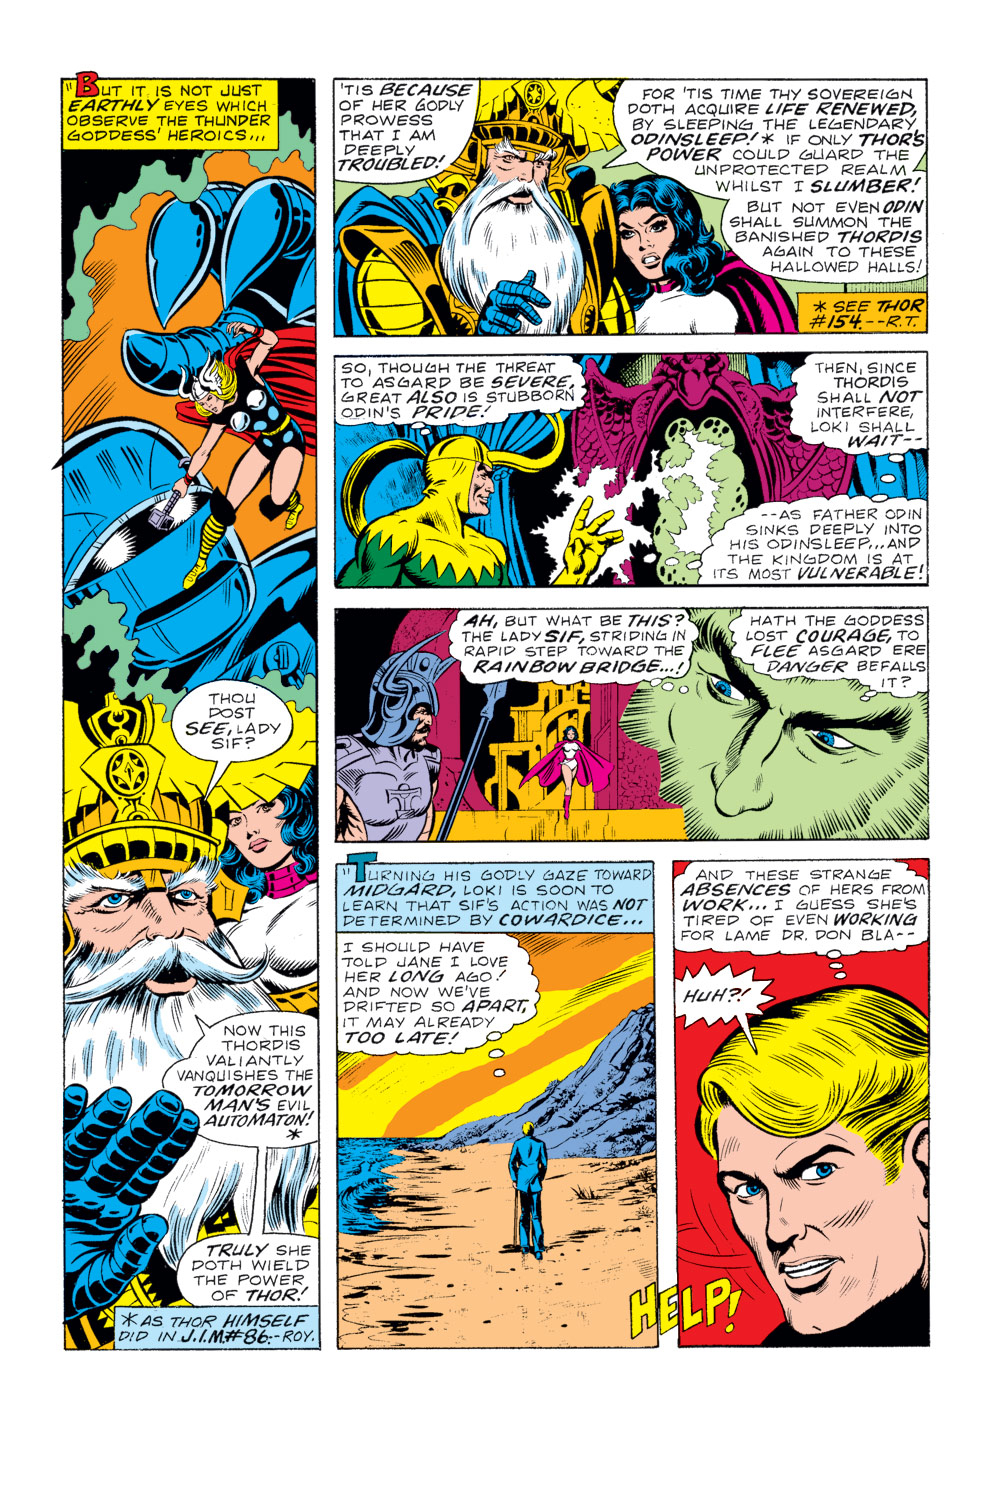 What If? (1977) issue 10 - Jane Foster had found the hammer of Thor - Page 23